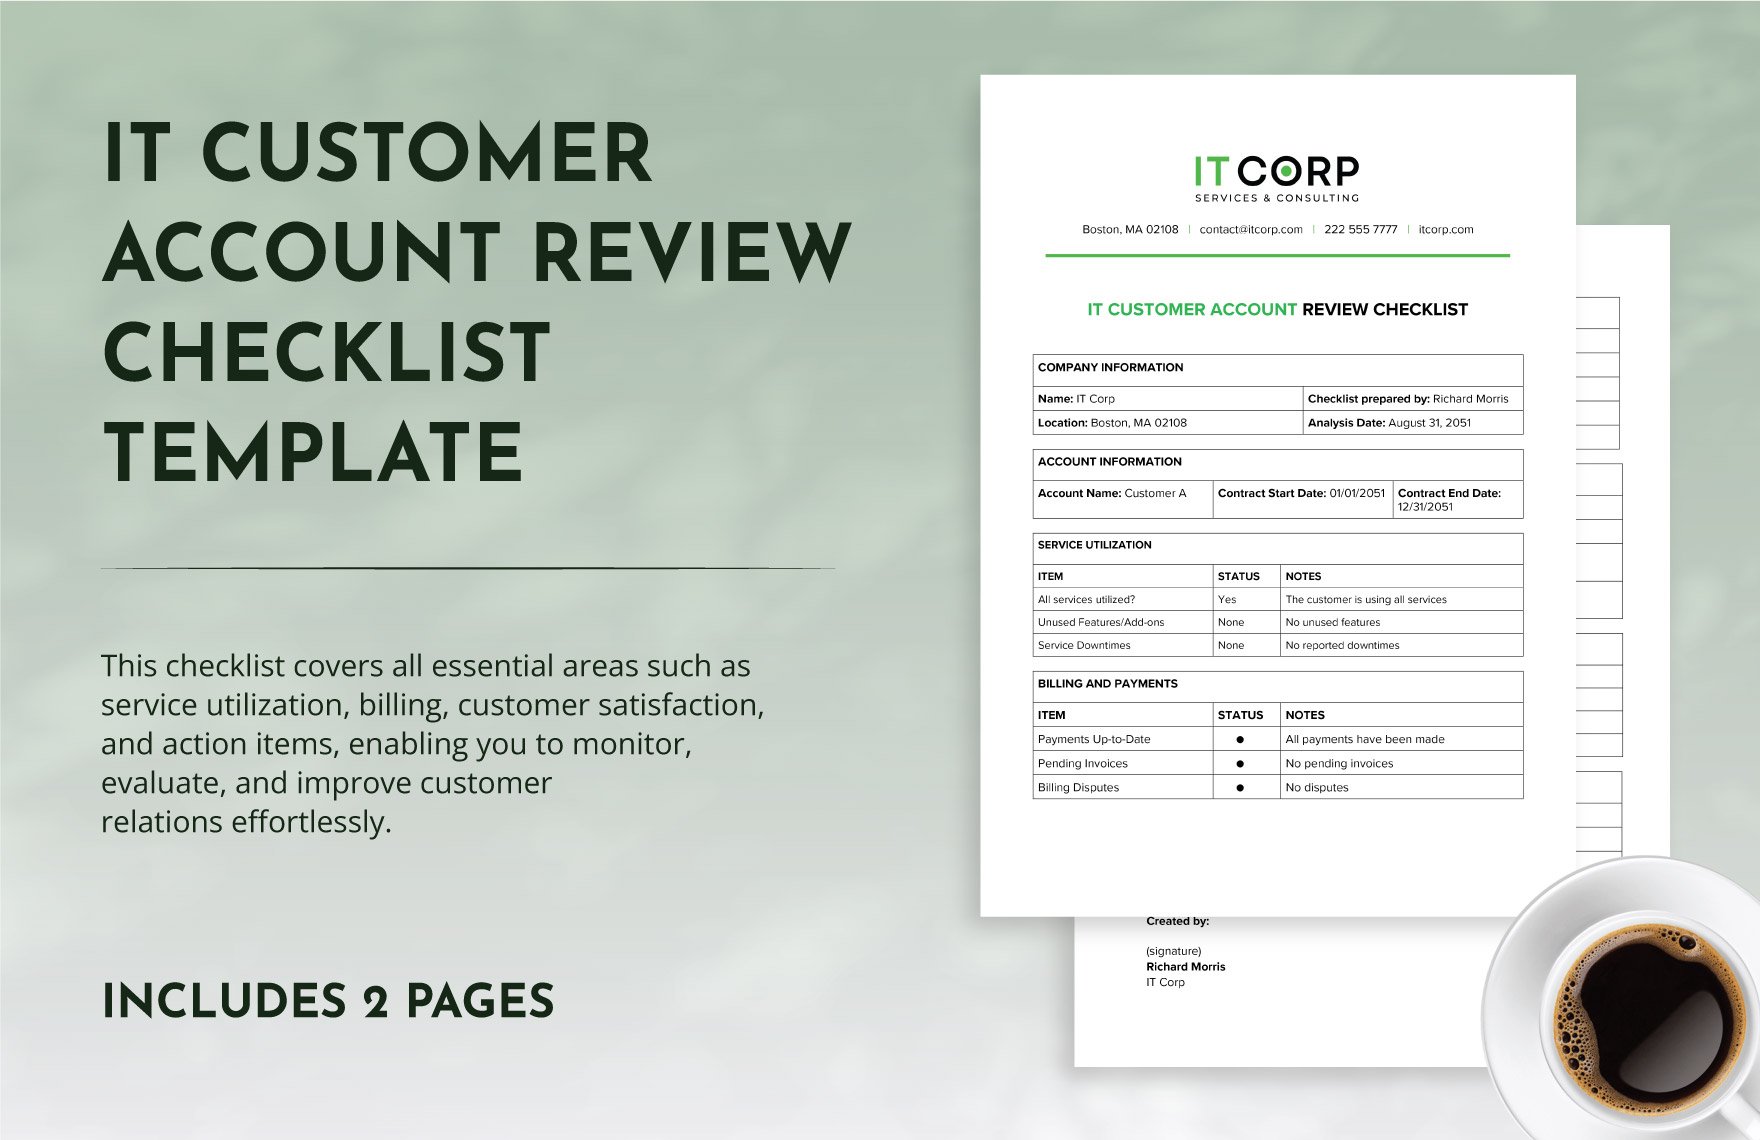 IT Customer Account Review Checklist Template